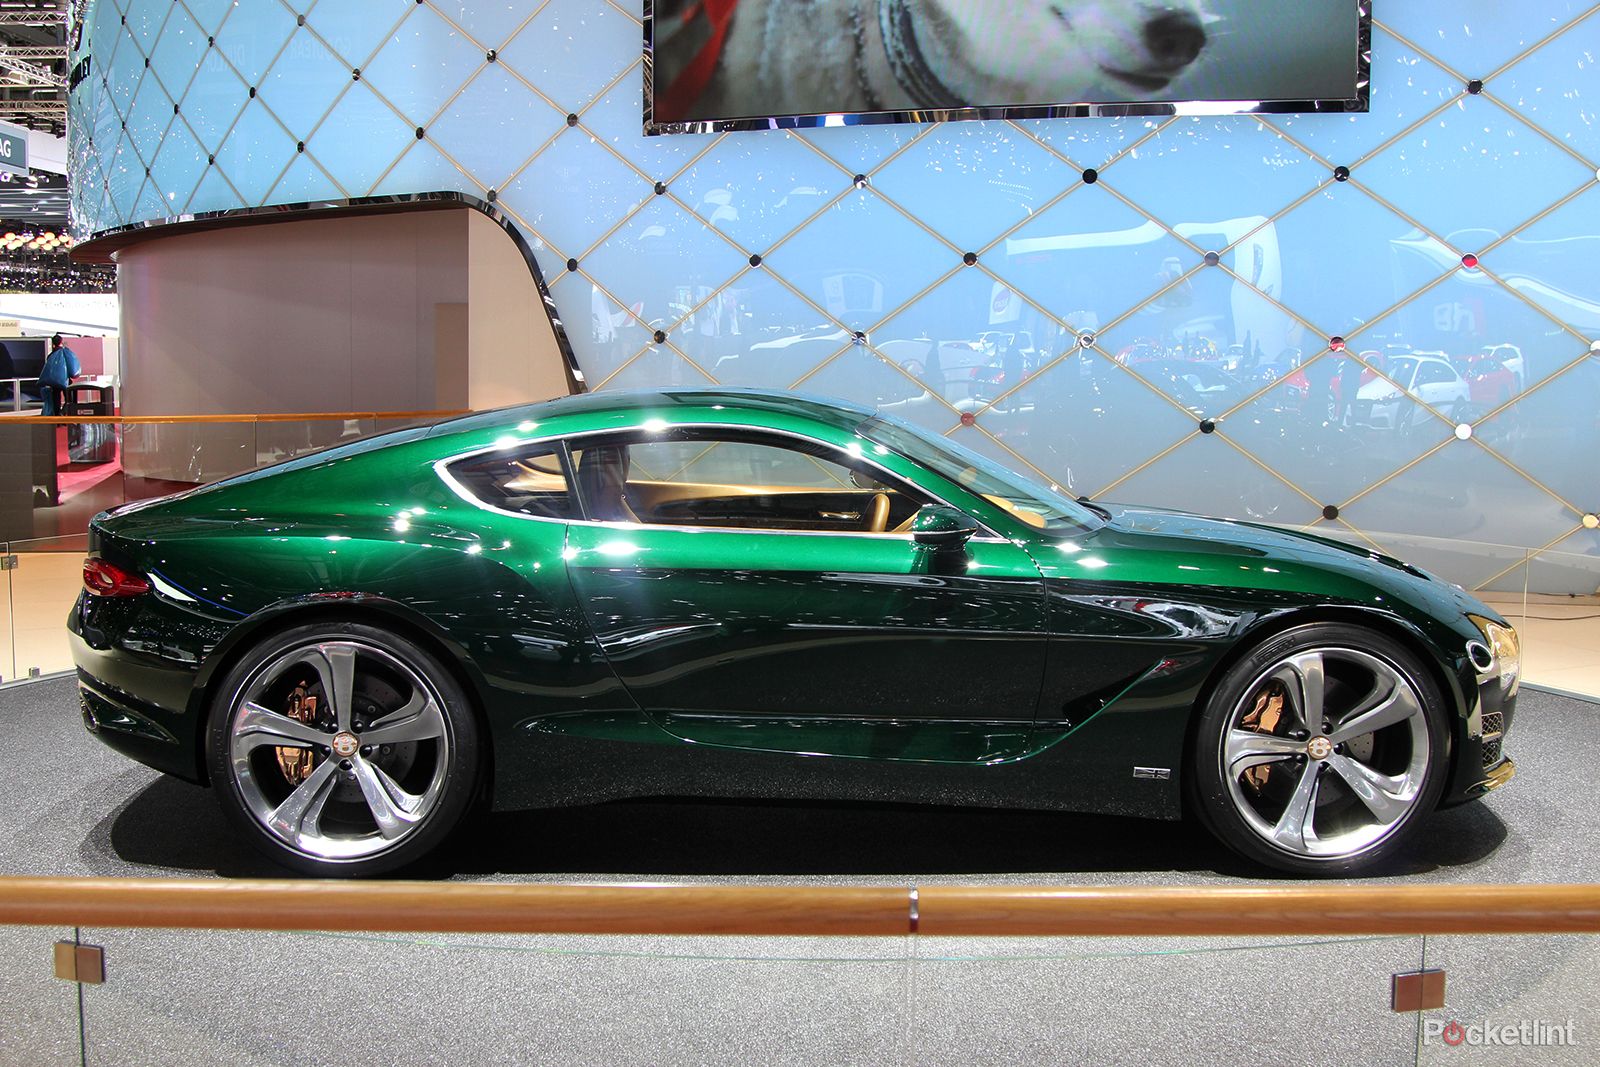 bentley exp 10 speed 6 concept old and new collide in explosive design image 2